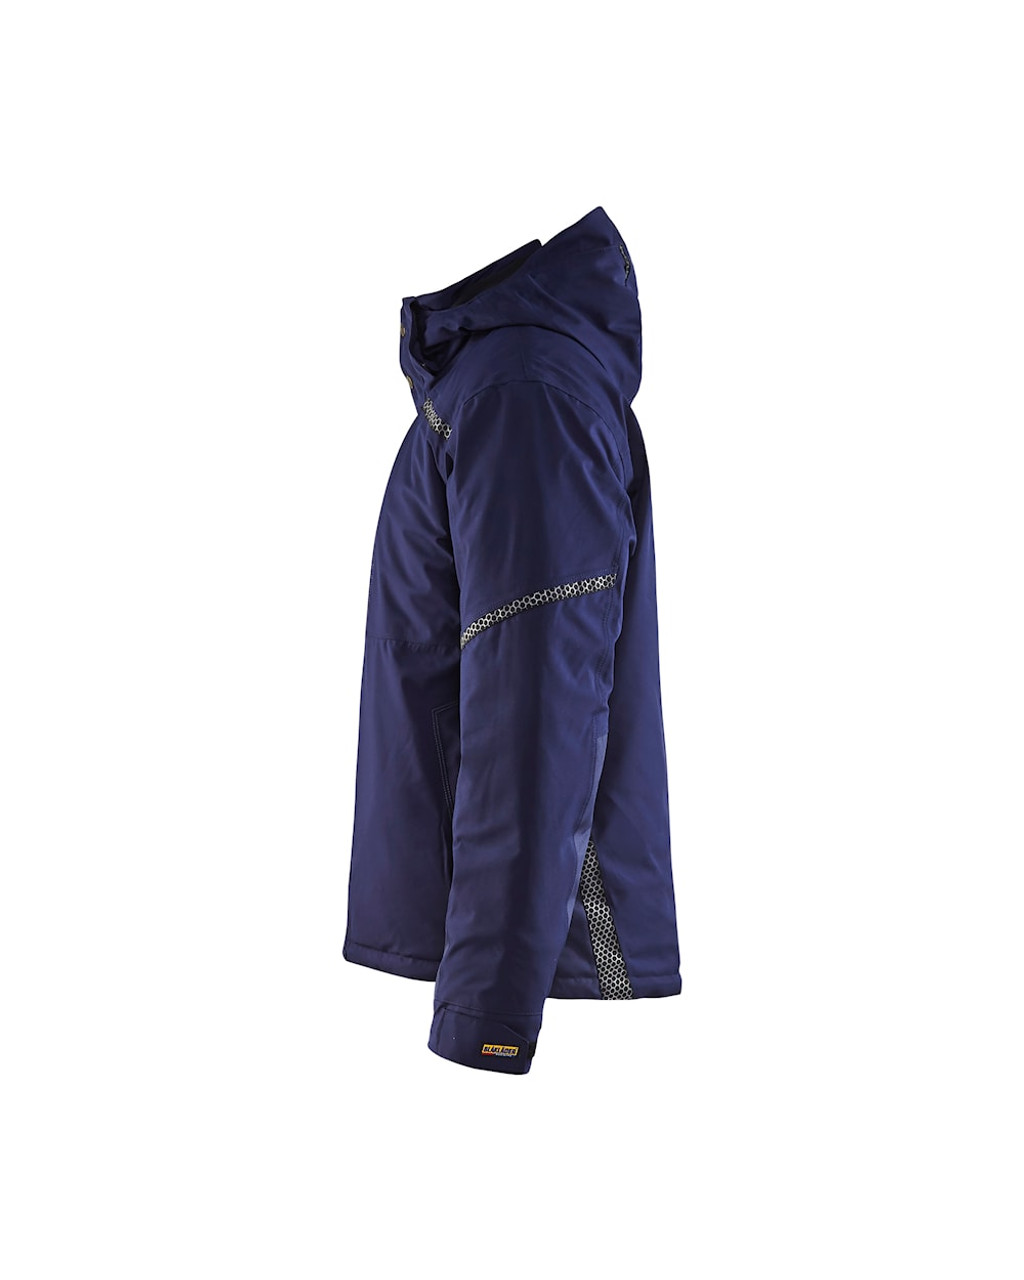 BLAKLADER Polyester Waterproof Navy Blue  Jacket  for Electricians that have Full Zip  available in Australia and New Zealand